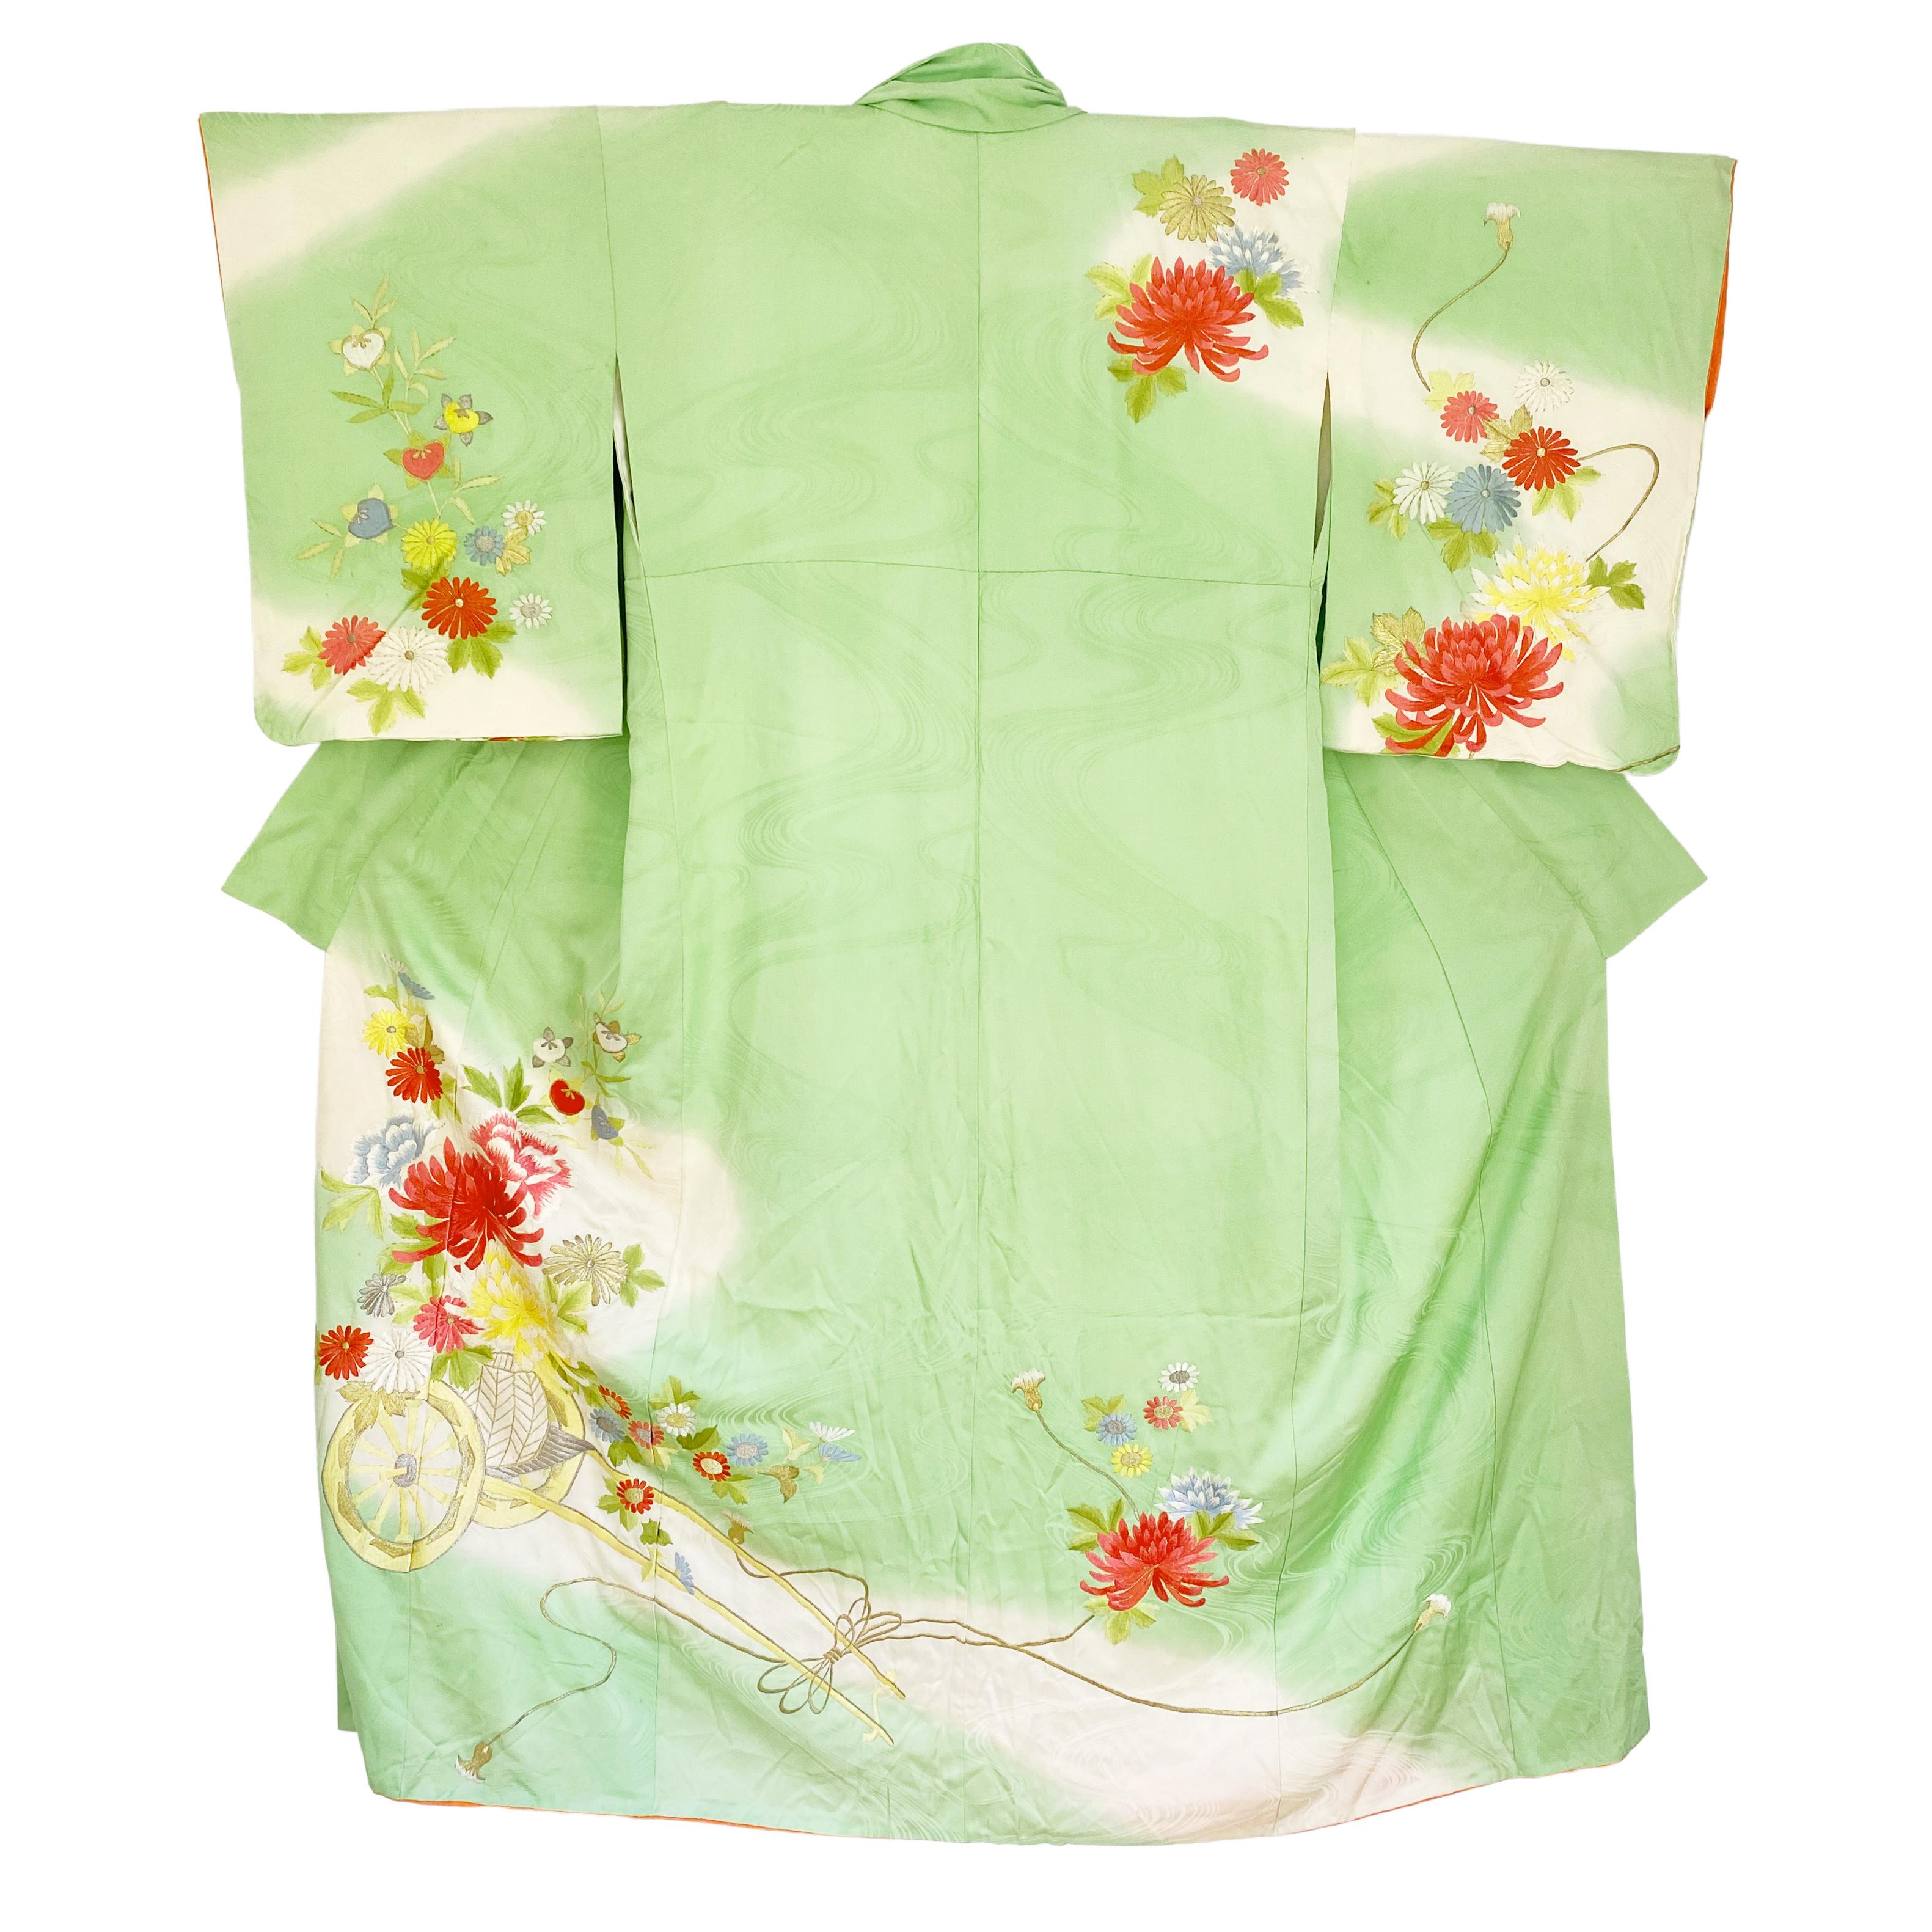 Gorgeous fresh green wave silk jacquard. 
Gold thread embroidered caleche and flowers. 
Subtly dramatic ombré lining.
Circa: 1890  MEIJI
Place of Origin: Japan
Material: Silk
Condition: Good - some age stains.  
Pale-ground printed all silk kimono